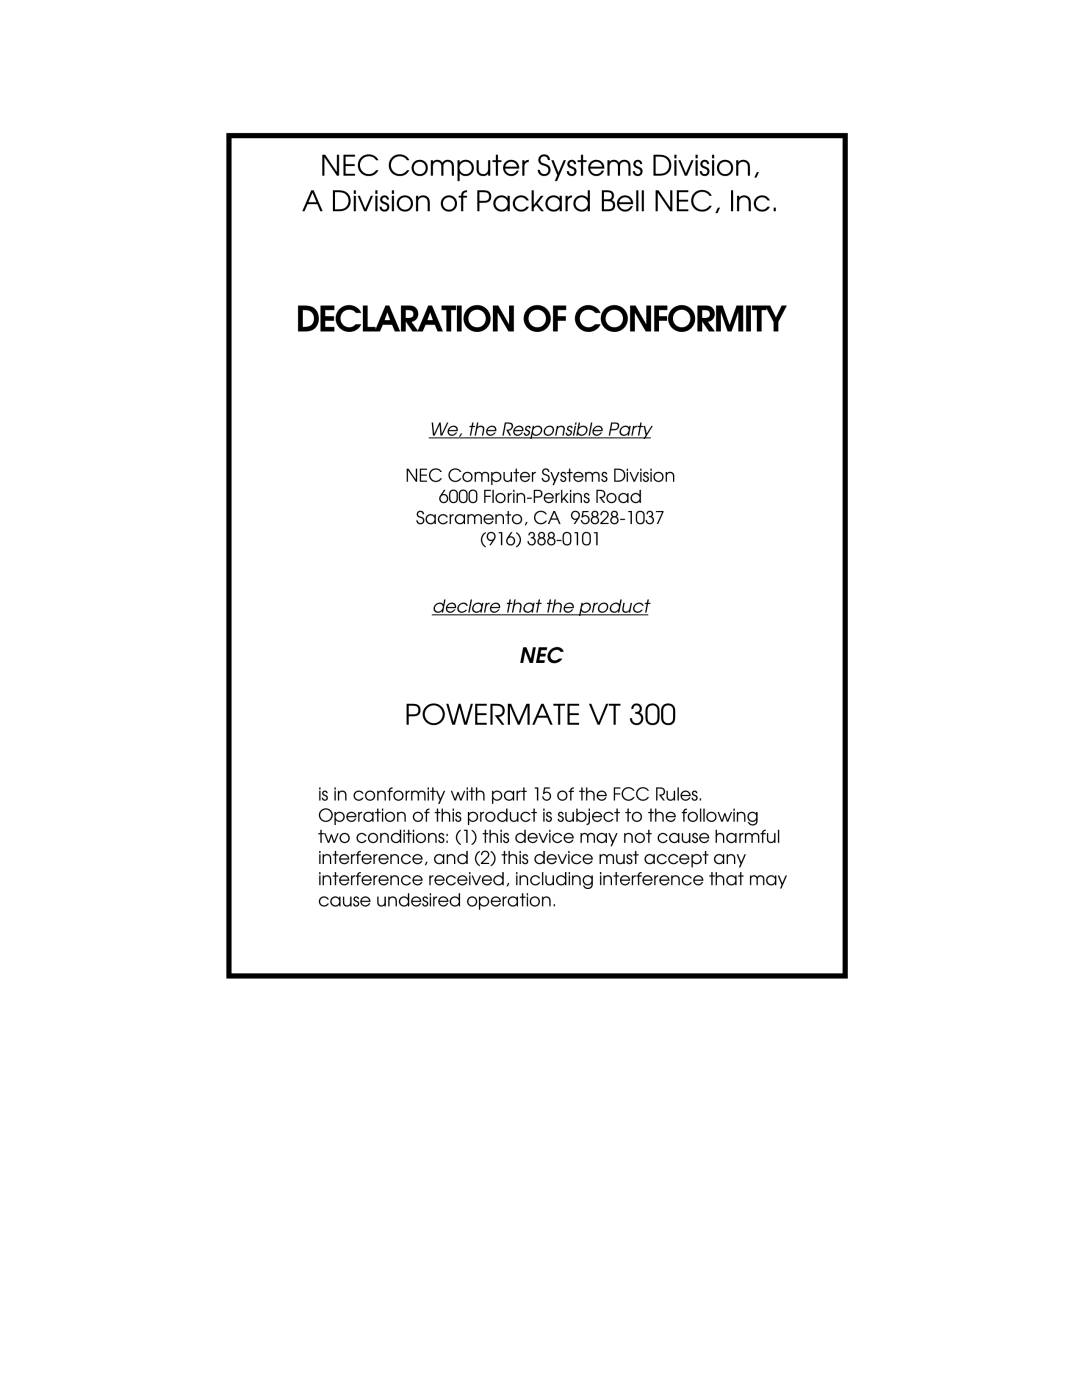 NEC VT 300 Series manual Declaration Of Conformity, Powermate Vt, We, the Responsible Party, declare that the product 